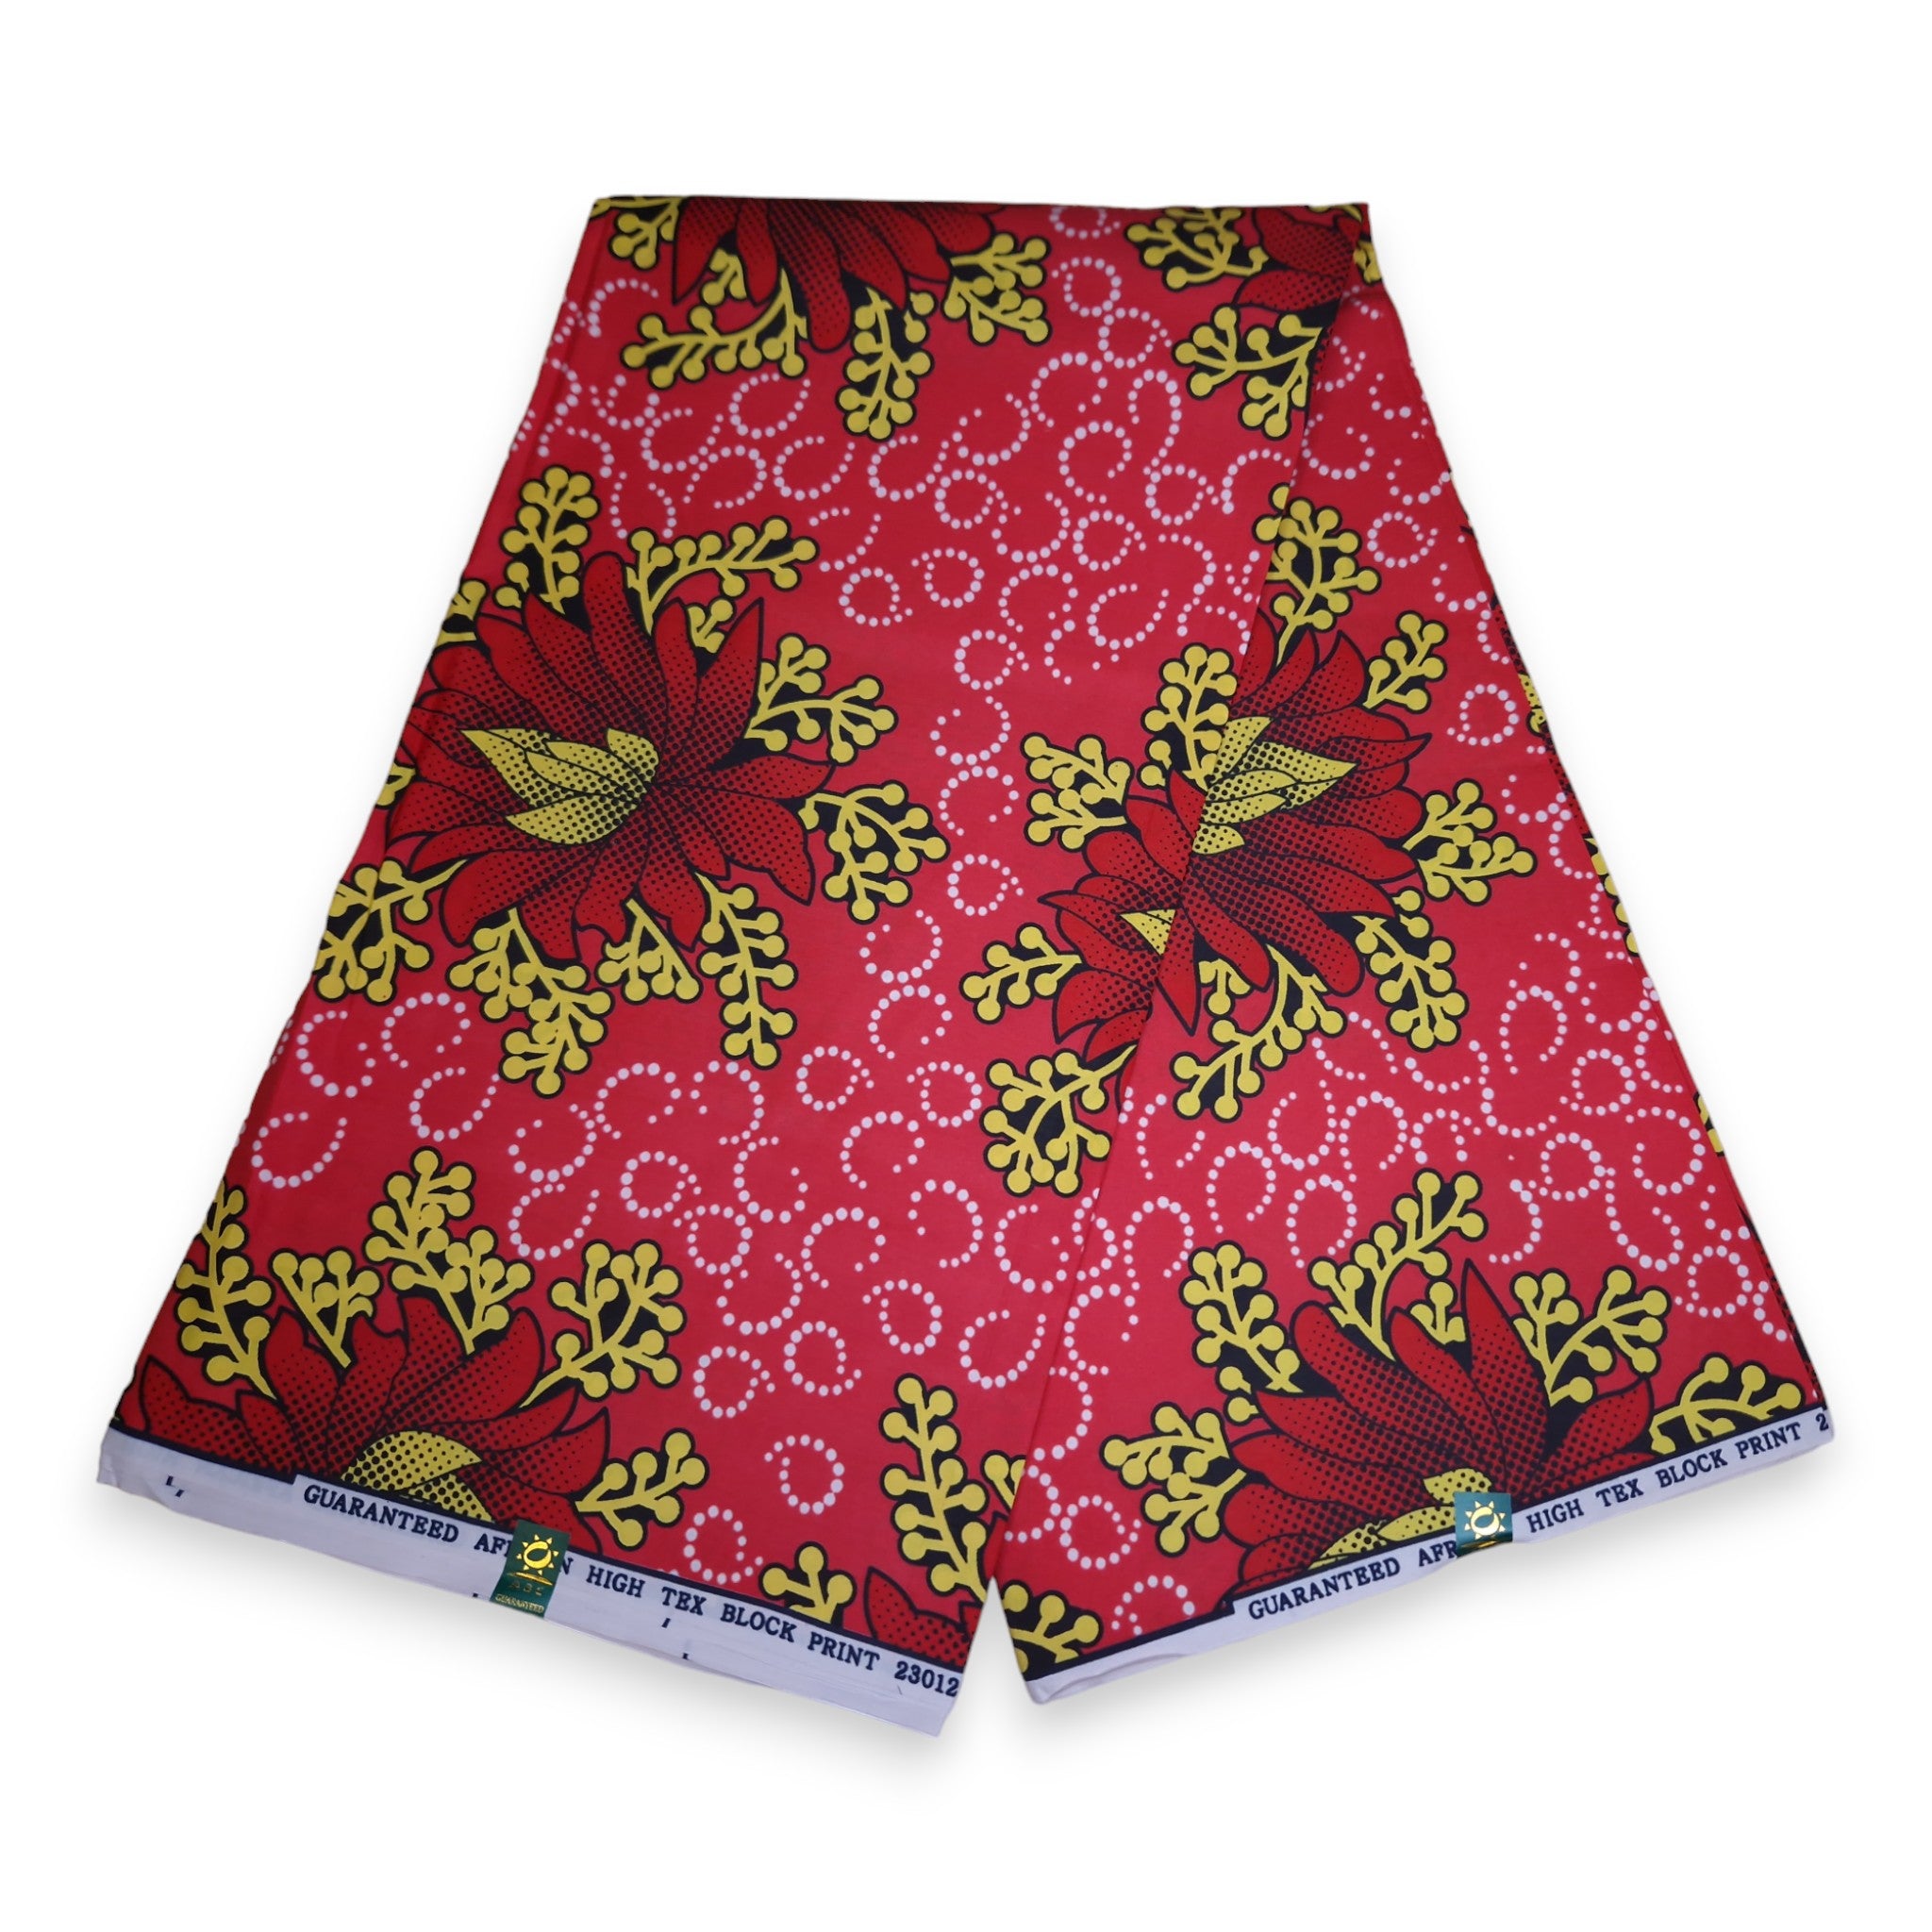 African print fabric - Flowers - Polycotton